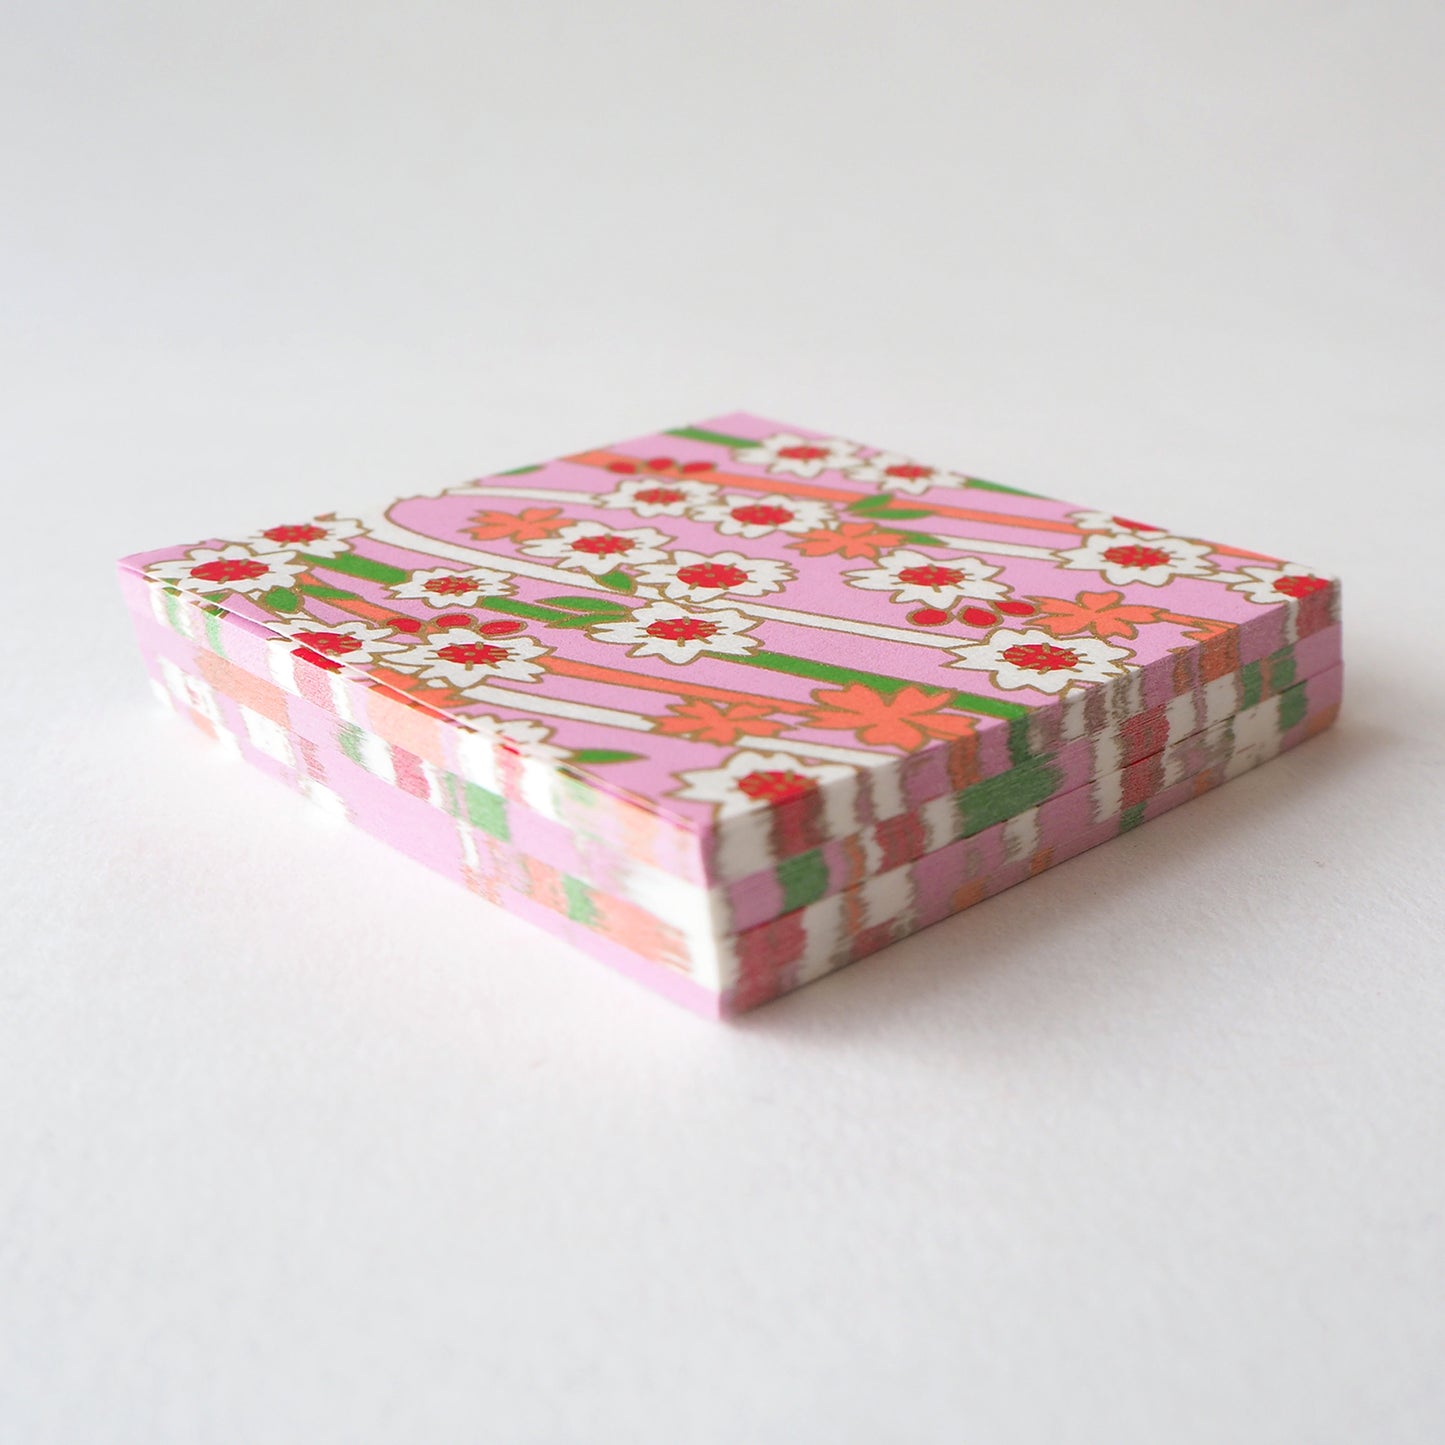 Pack of 100 Sheets 7x7cm Yuzen Washi Origami Paper HZ-172 - Double Cherry Blossom Pink - washi paper - Lavender Home London